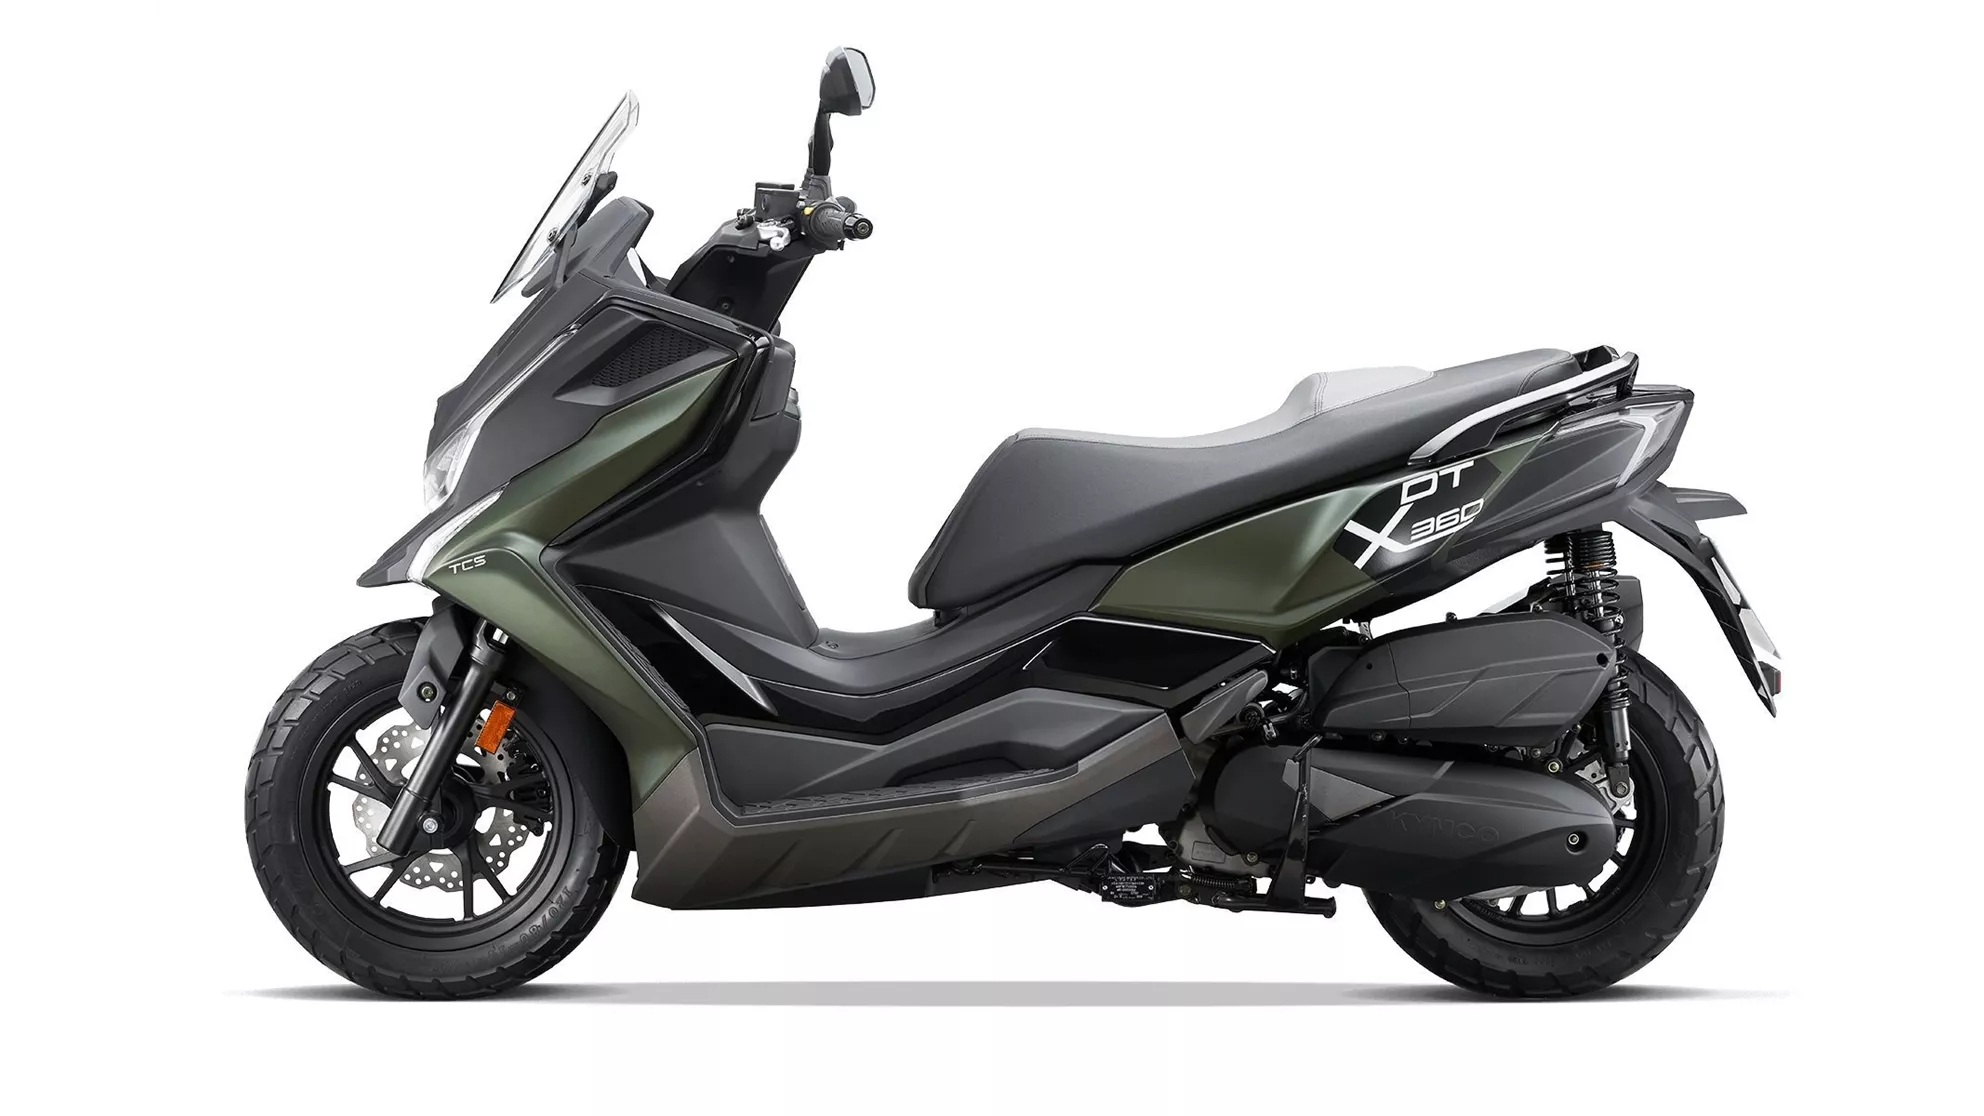 Kymco DT X360 350i ABS - Image 13